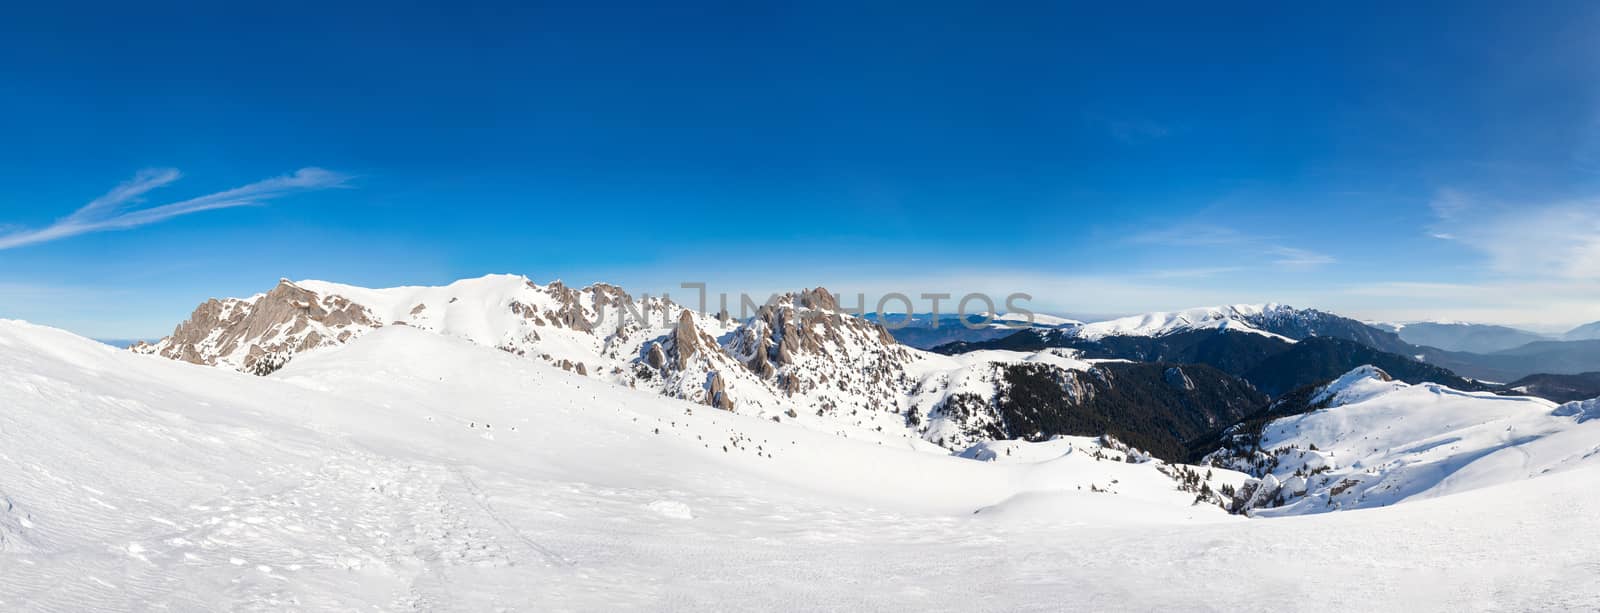 Panoramic view of Mount Ciucas peack on winter by PixAchi